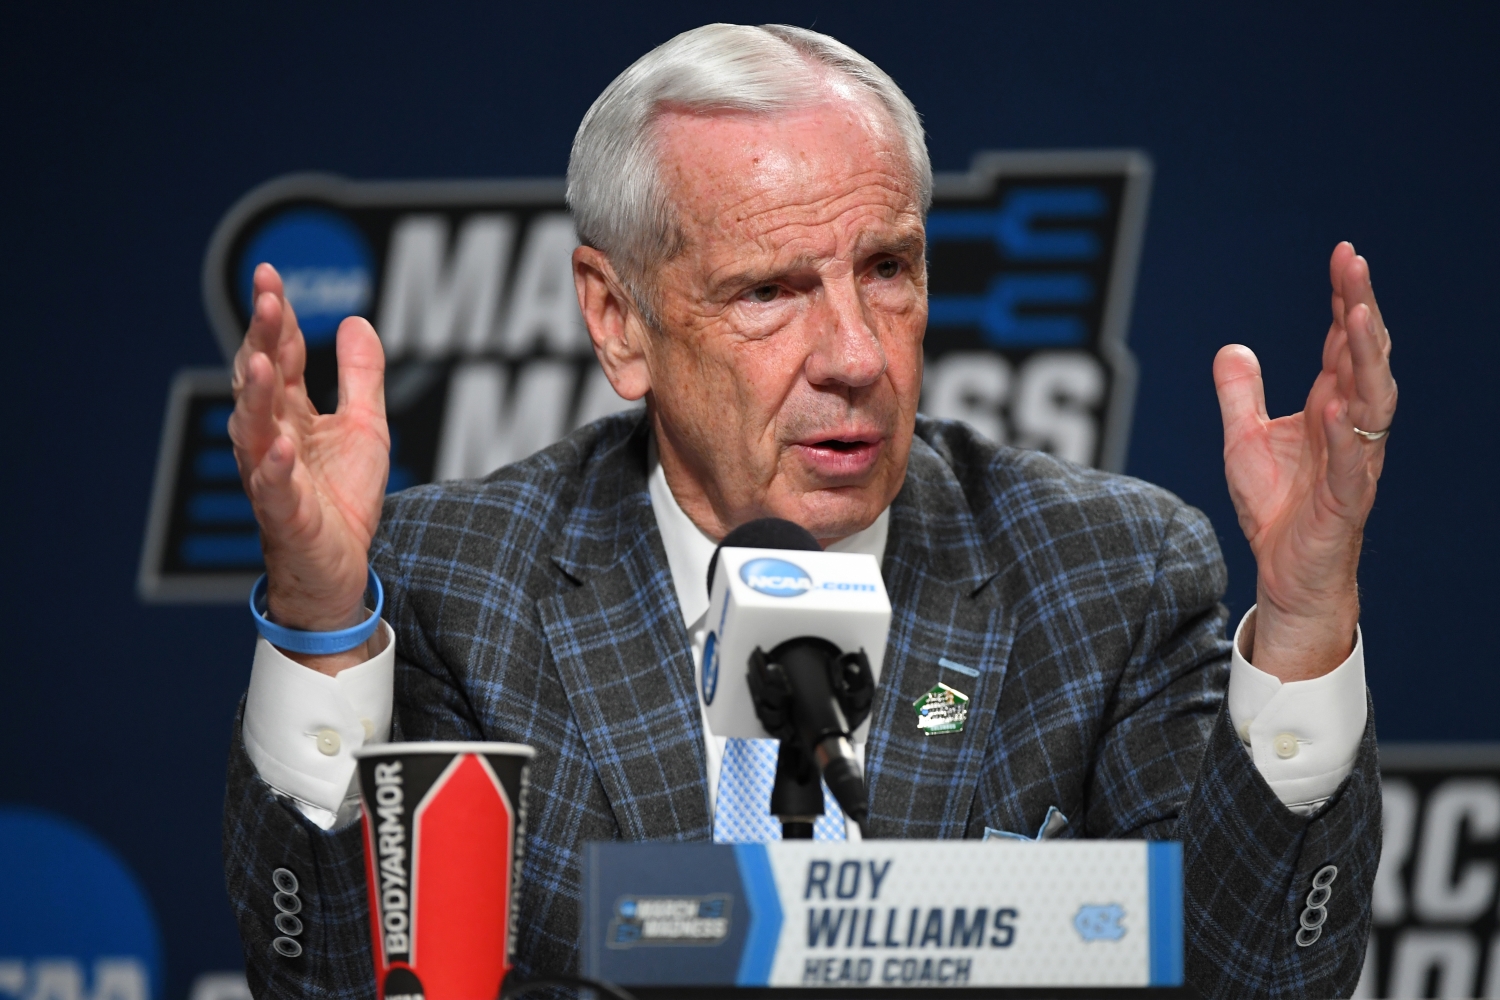 University of North Carolina Tar Heels coach Roy Williams speaks during a press conference.